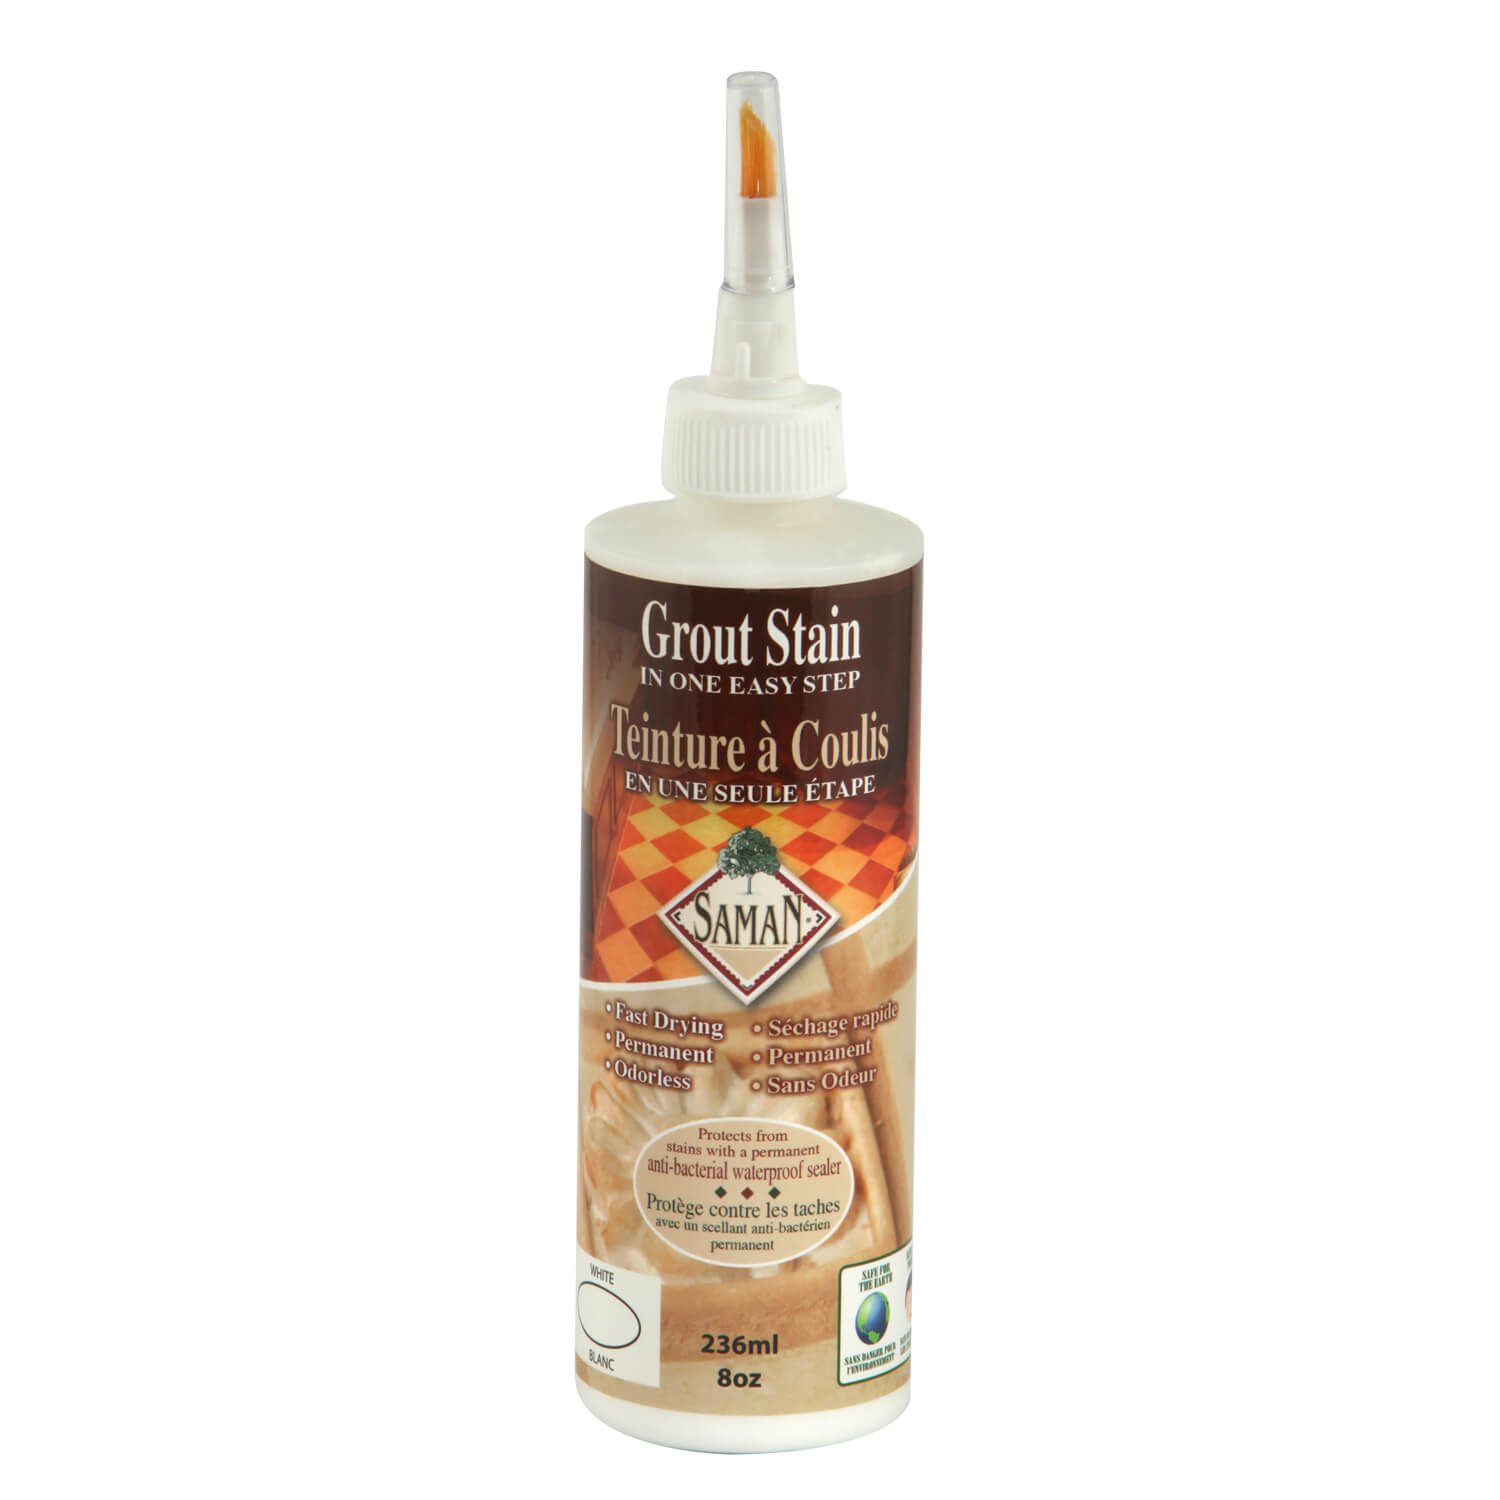 Grout stain with applicator SamaN